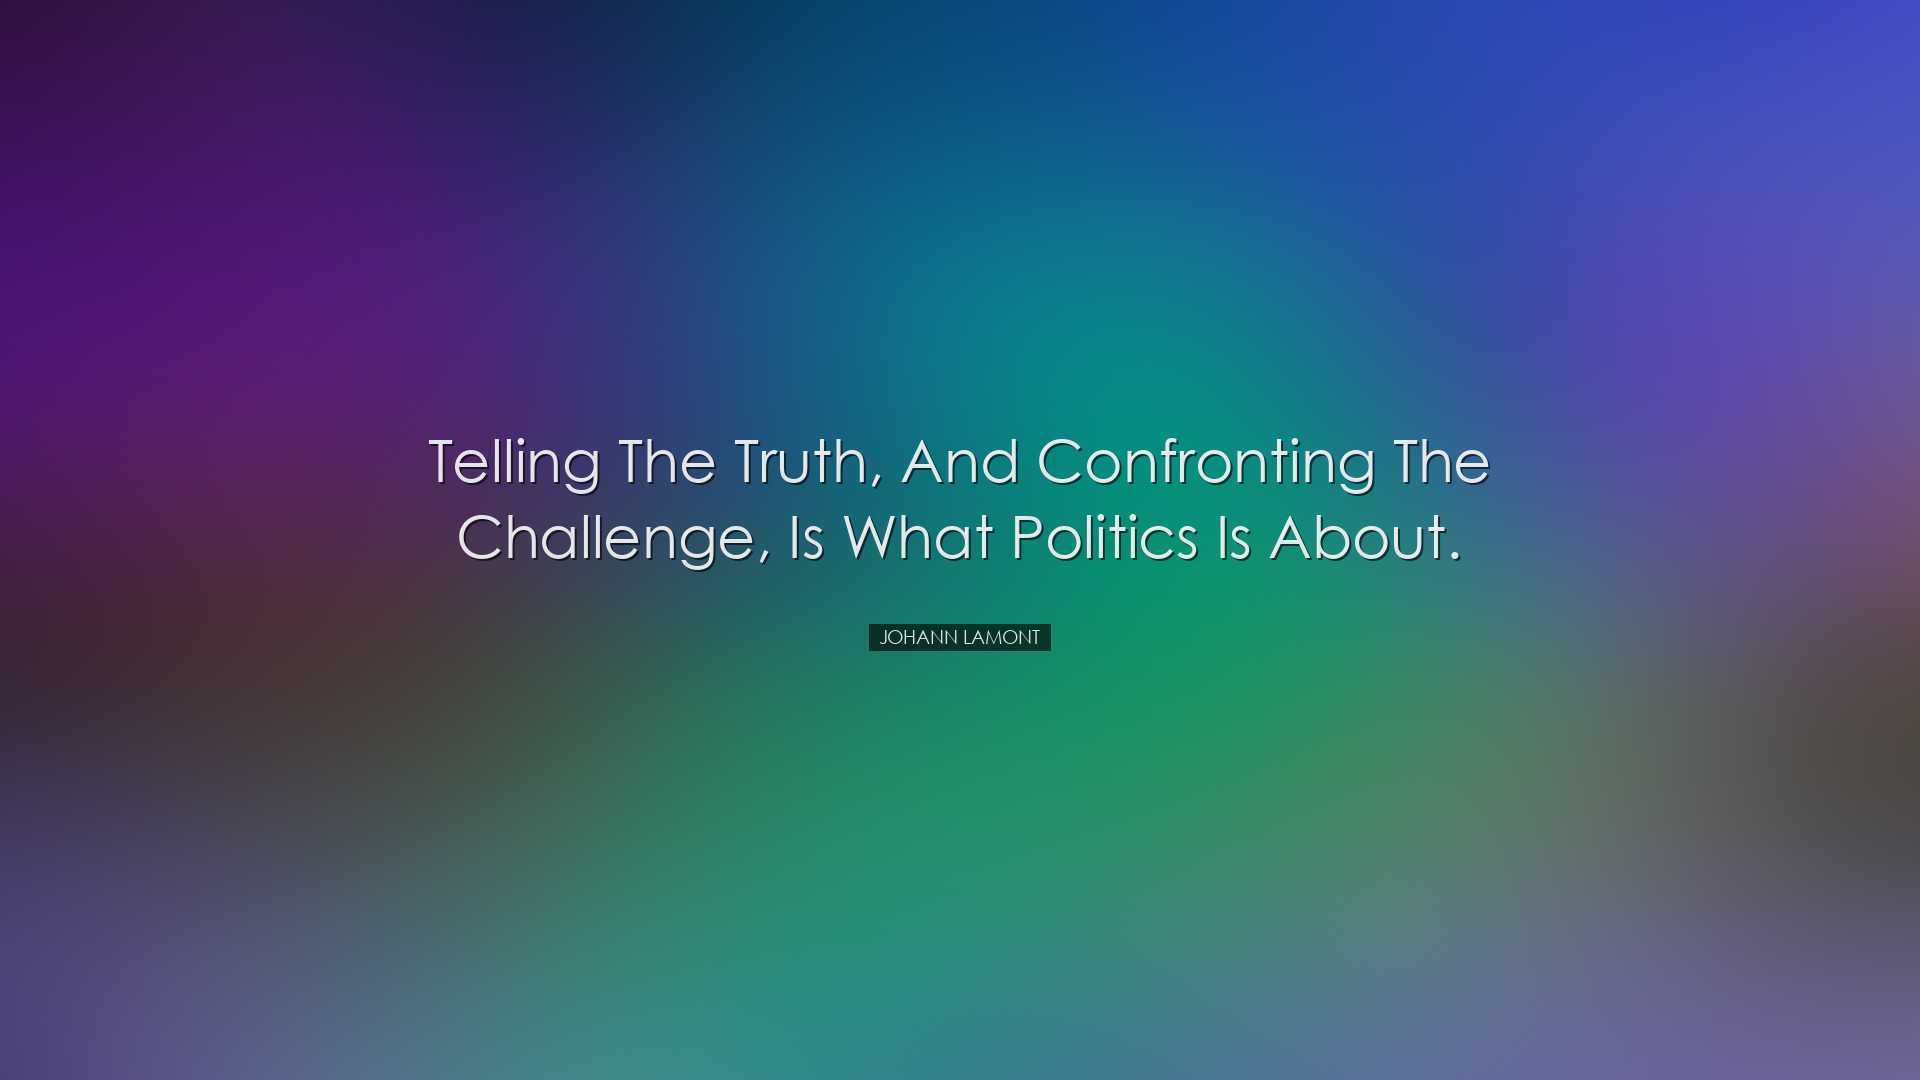 Telling the truth, and confronting the challenge, is what politics